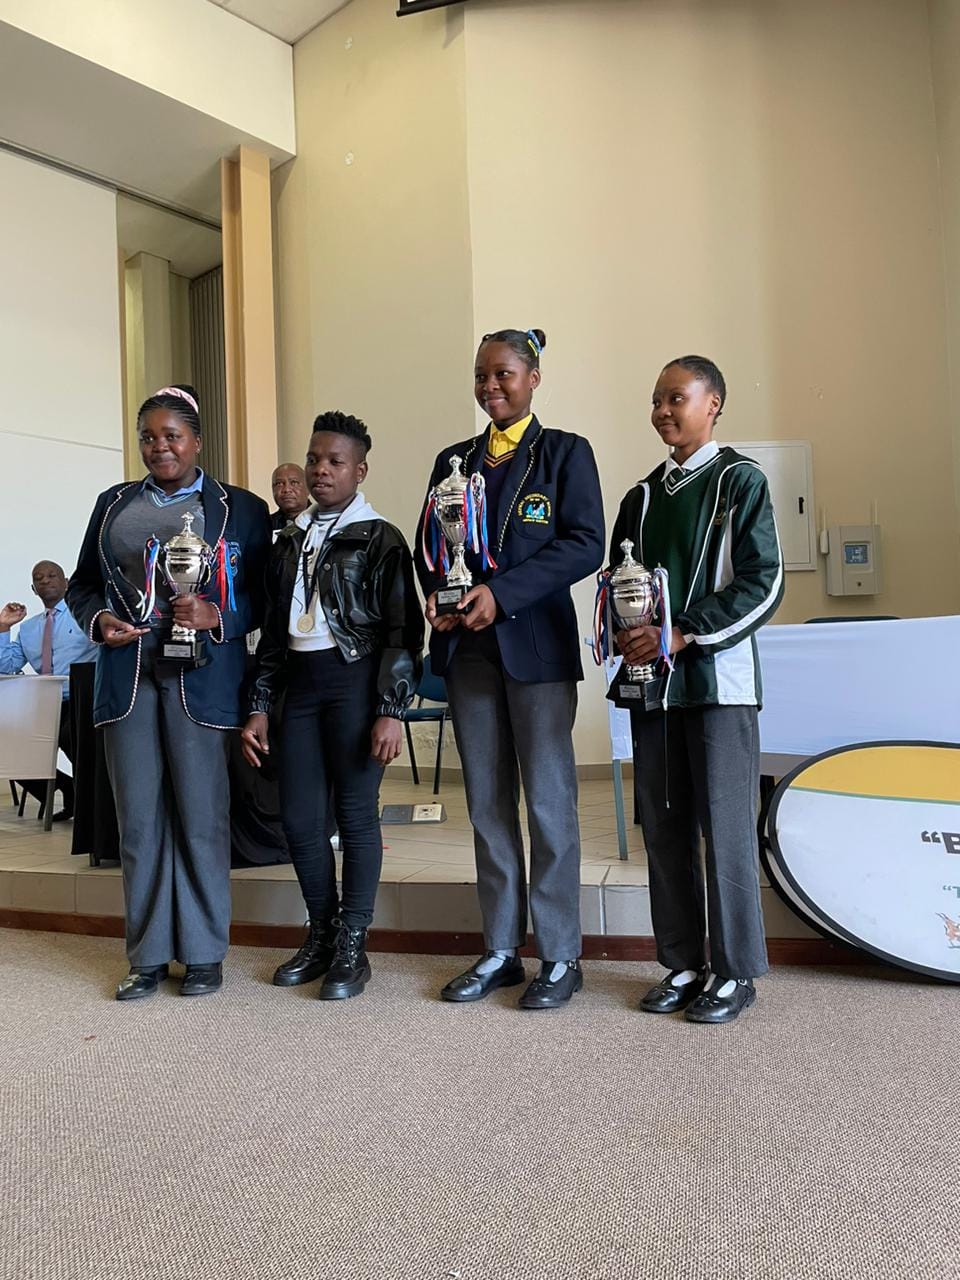 Learners announced to represent the Bohlabela Region in the Provincial Road Safety Debates Competition